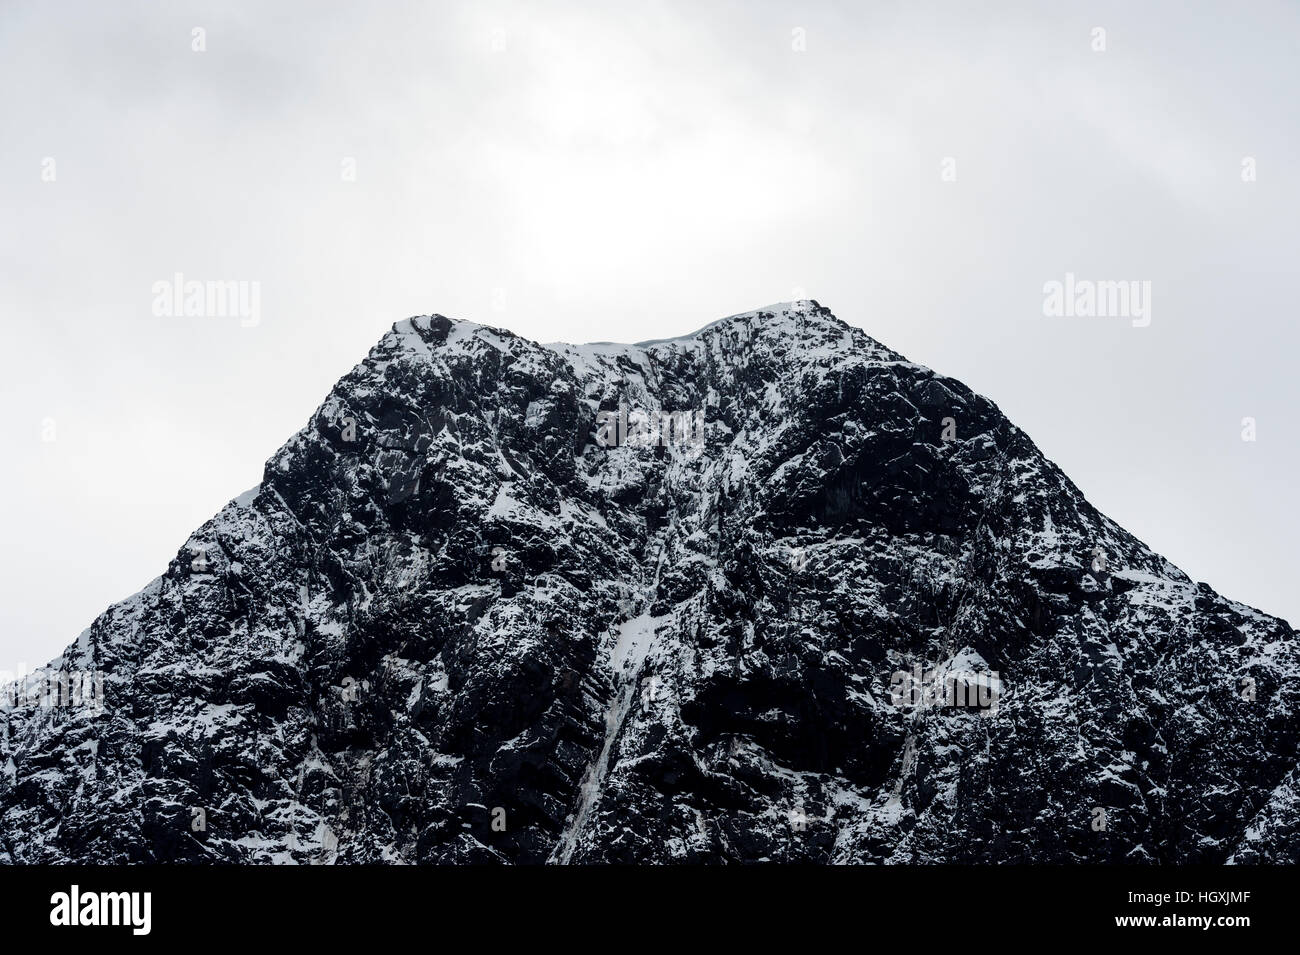 A rugged cone-shaped mountain summit dusted in snow and ice. Stock Photo